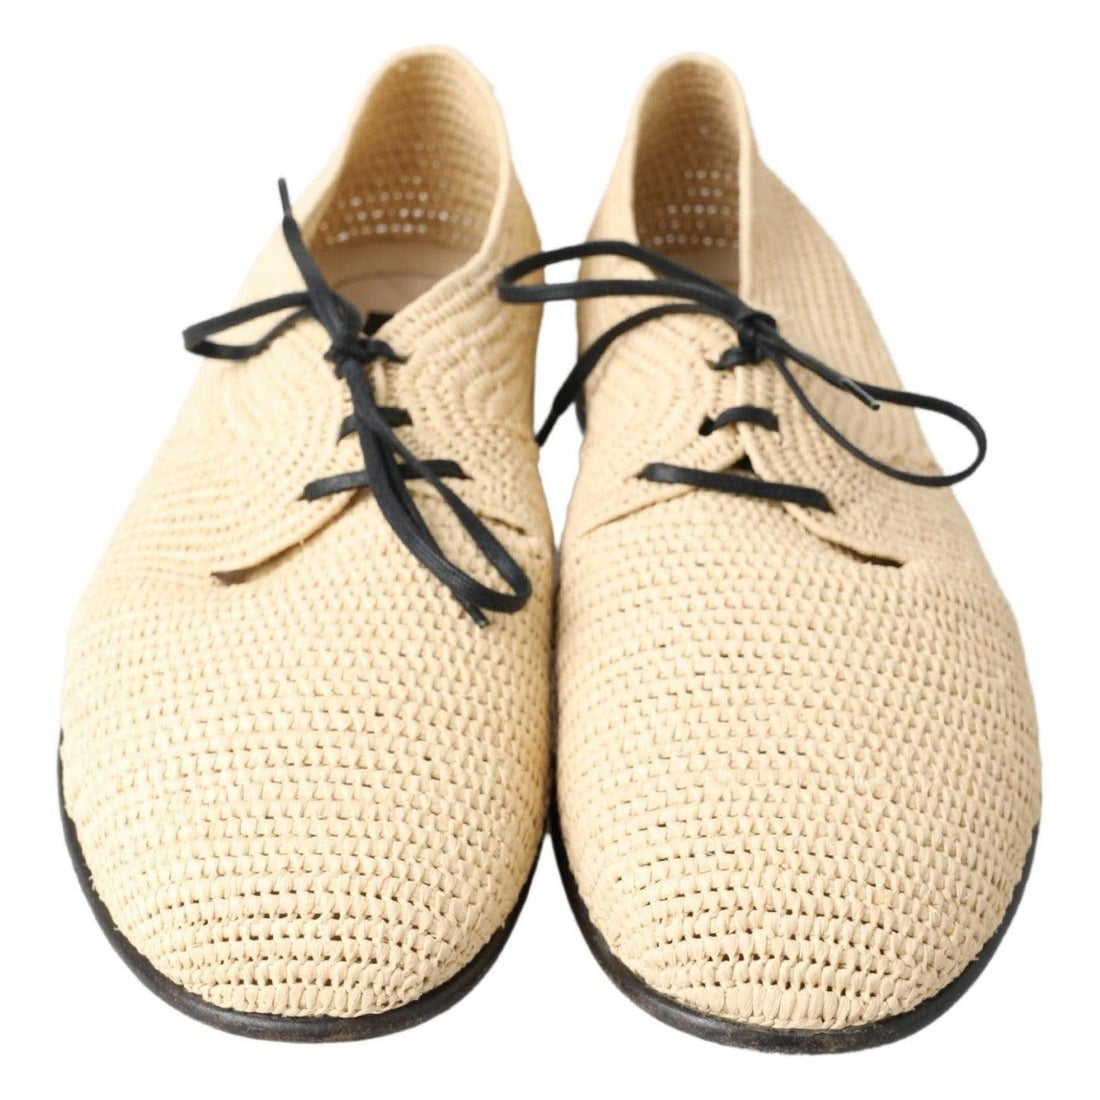 Dolce & Gabbana Beige Woven Lace Up Casual Derby Shoes